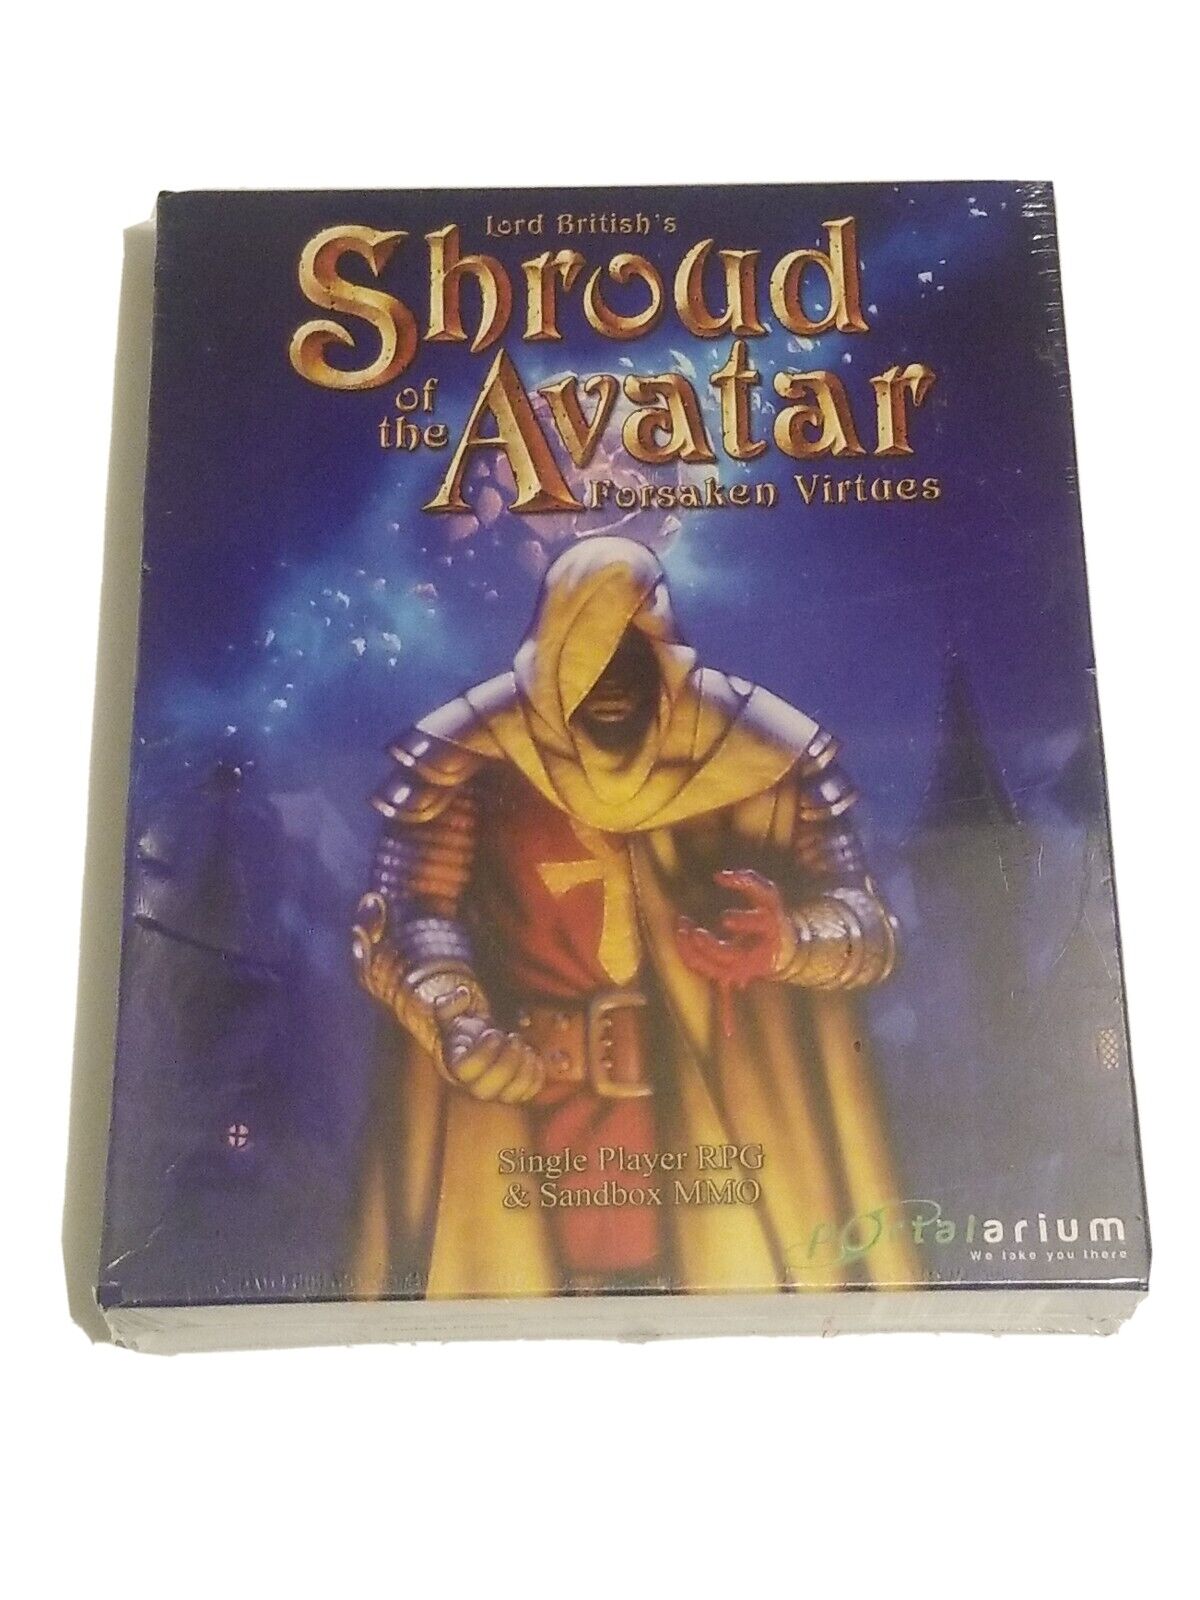 Shroud of the Avatar Forsaken Virtues Collectors Boxed Edition PC Computer Game